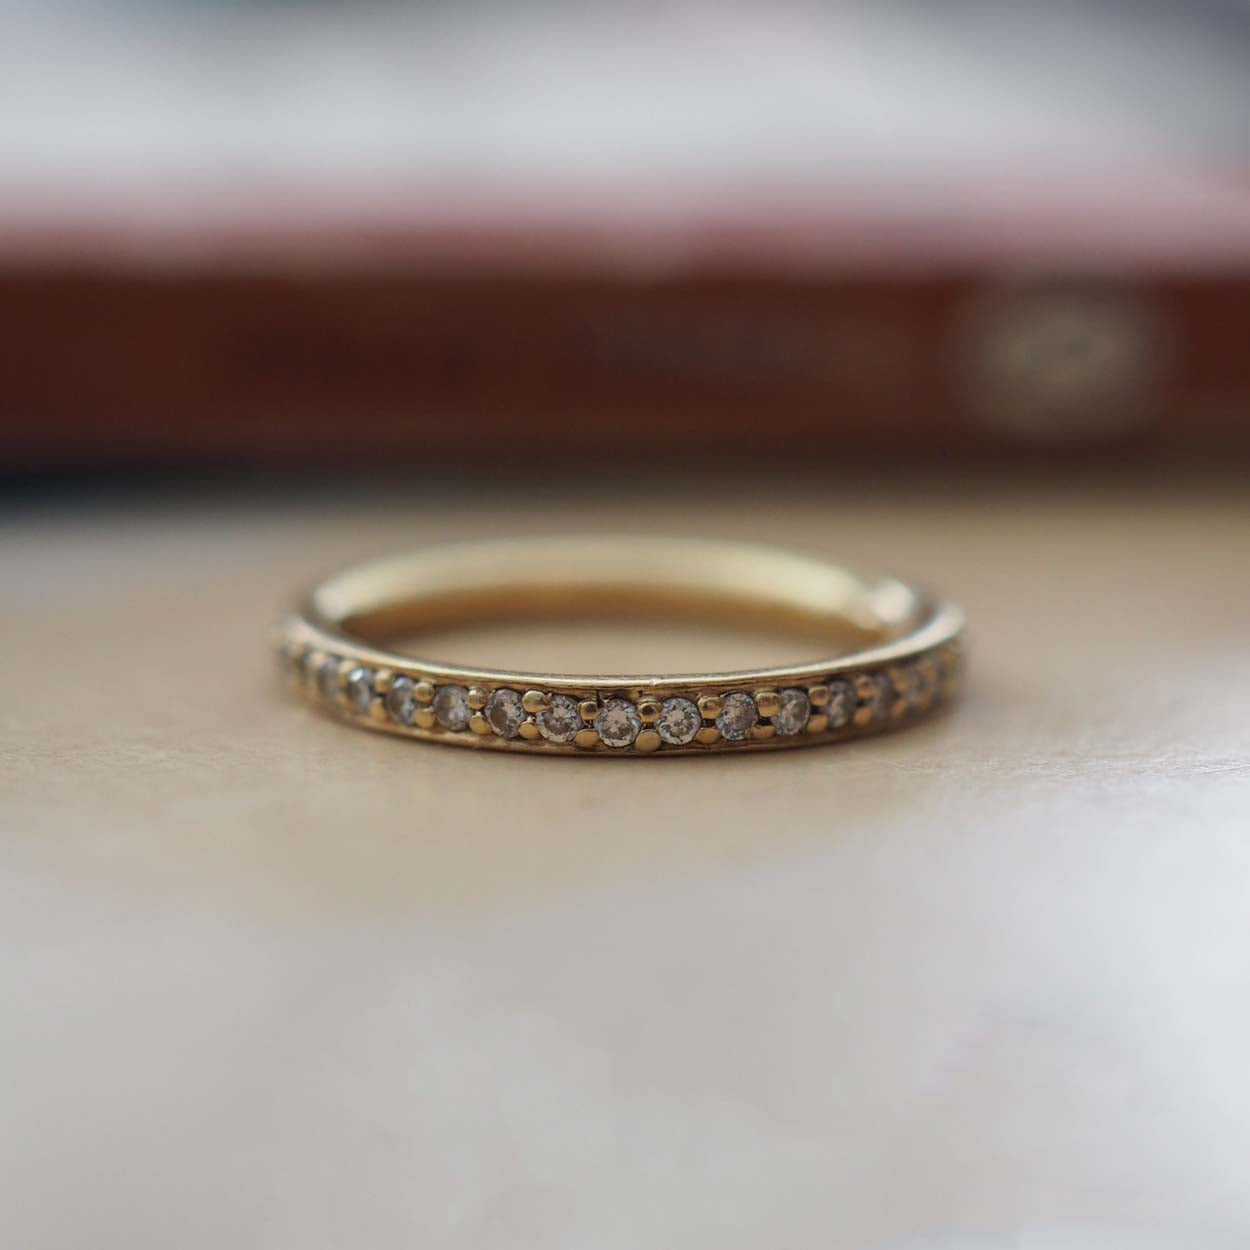 Diamond Wedding Band in Yellow or White Gold, Symbolising Eternal Commitment